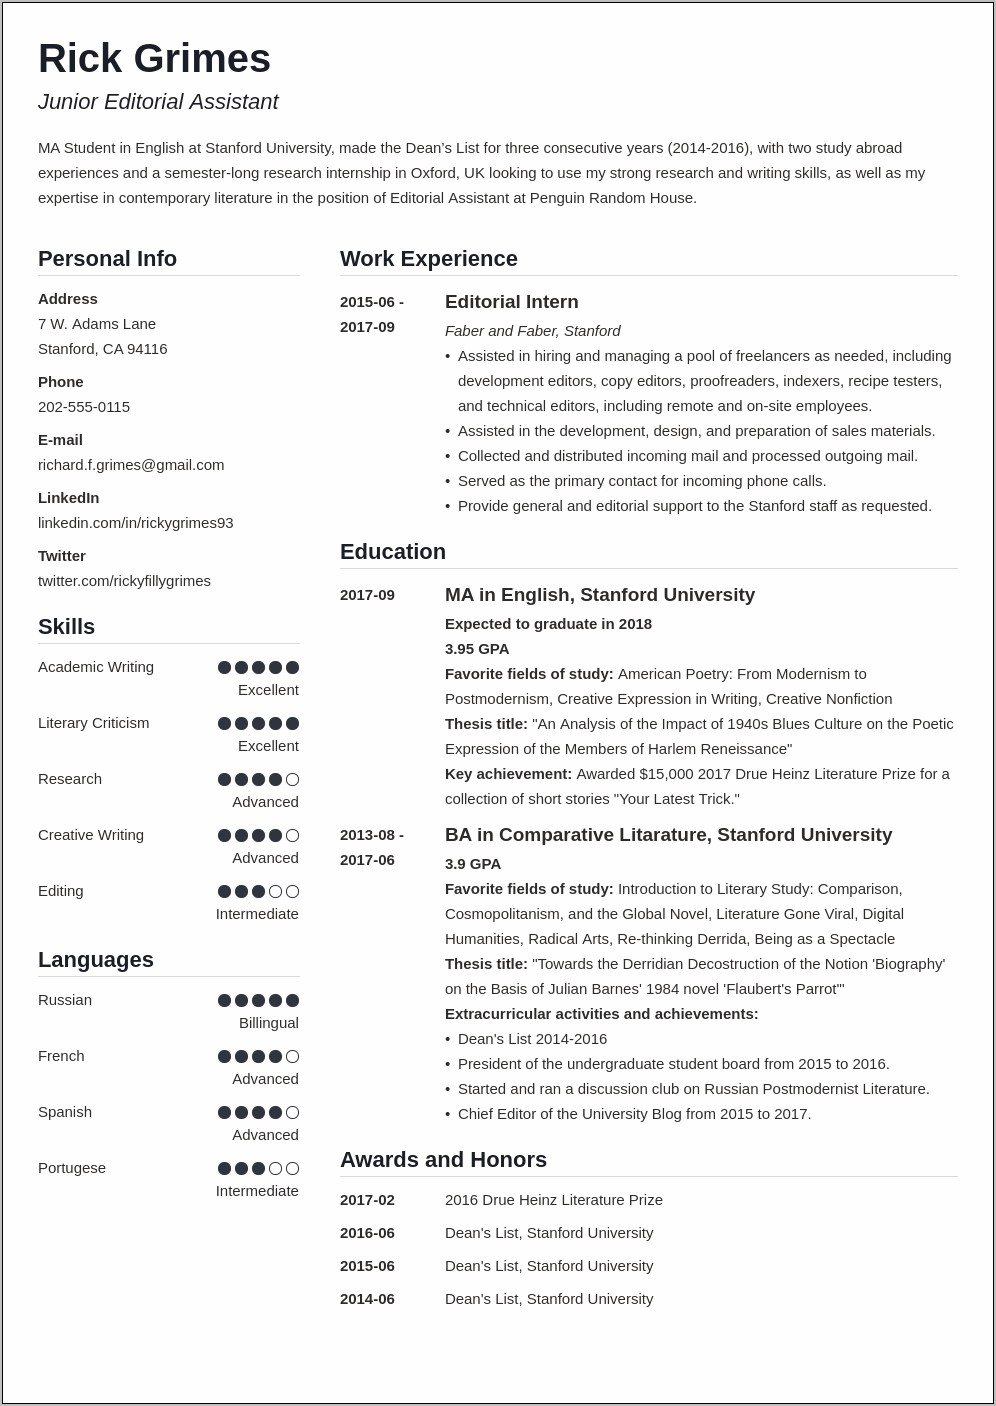 Resume Summary Examples For No Experience